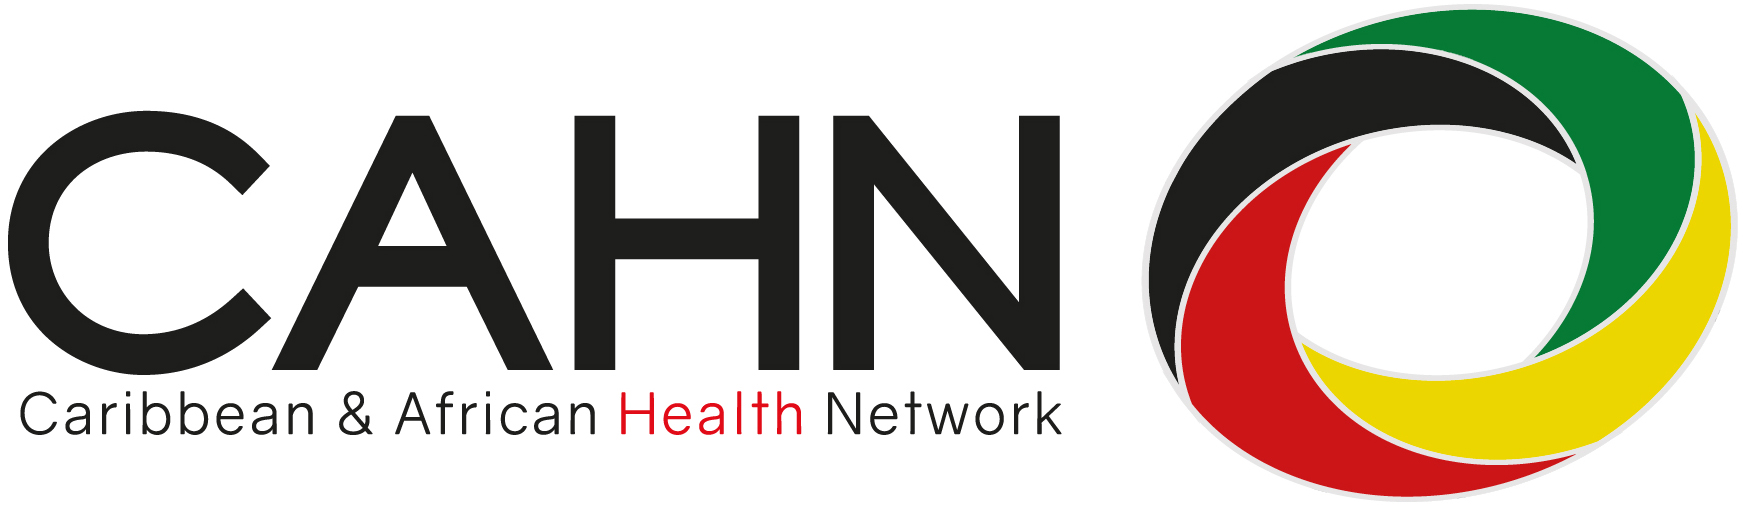 Caribbean and African Health Network CIC